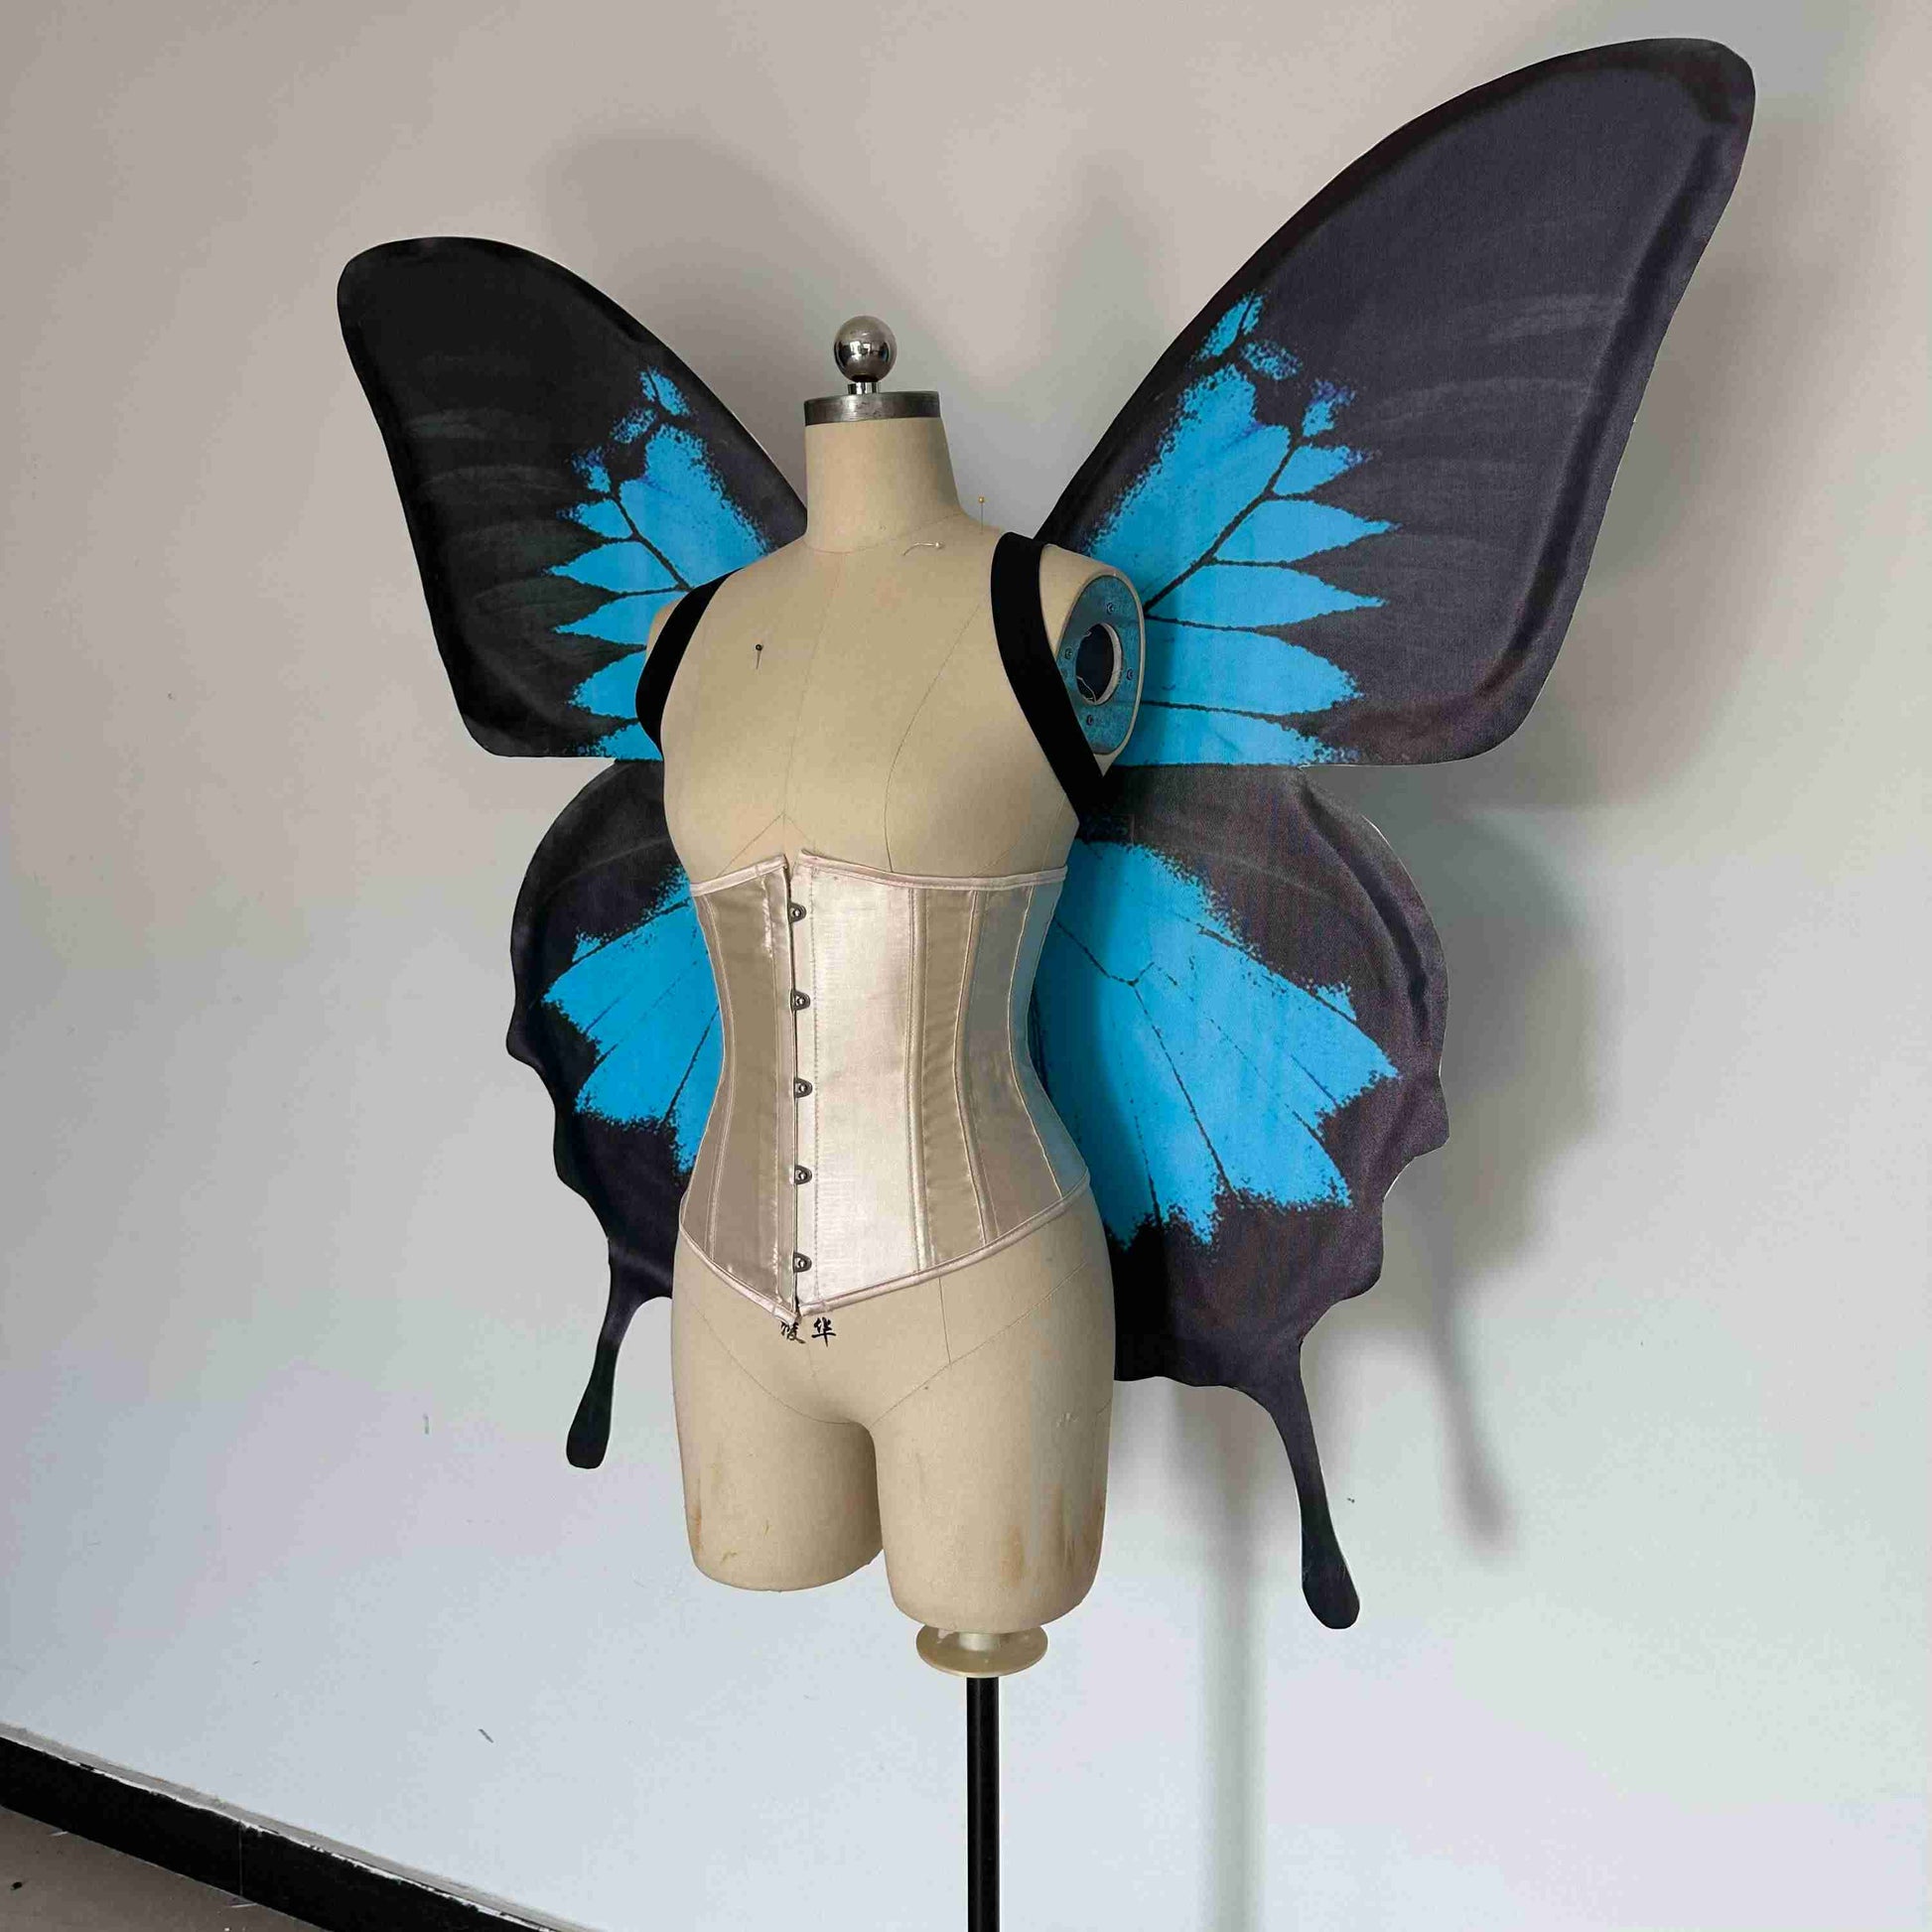 Our blue black butterfly wings from the left. Made from cloth. Can be also named fairy wings or pixie wings.